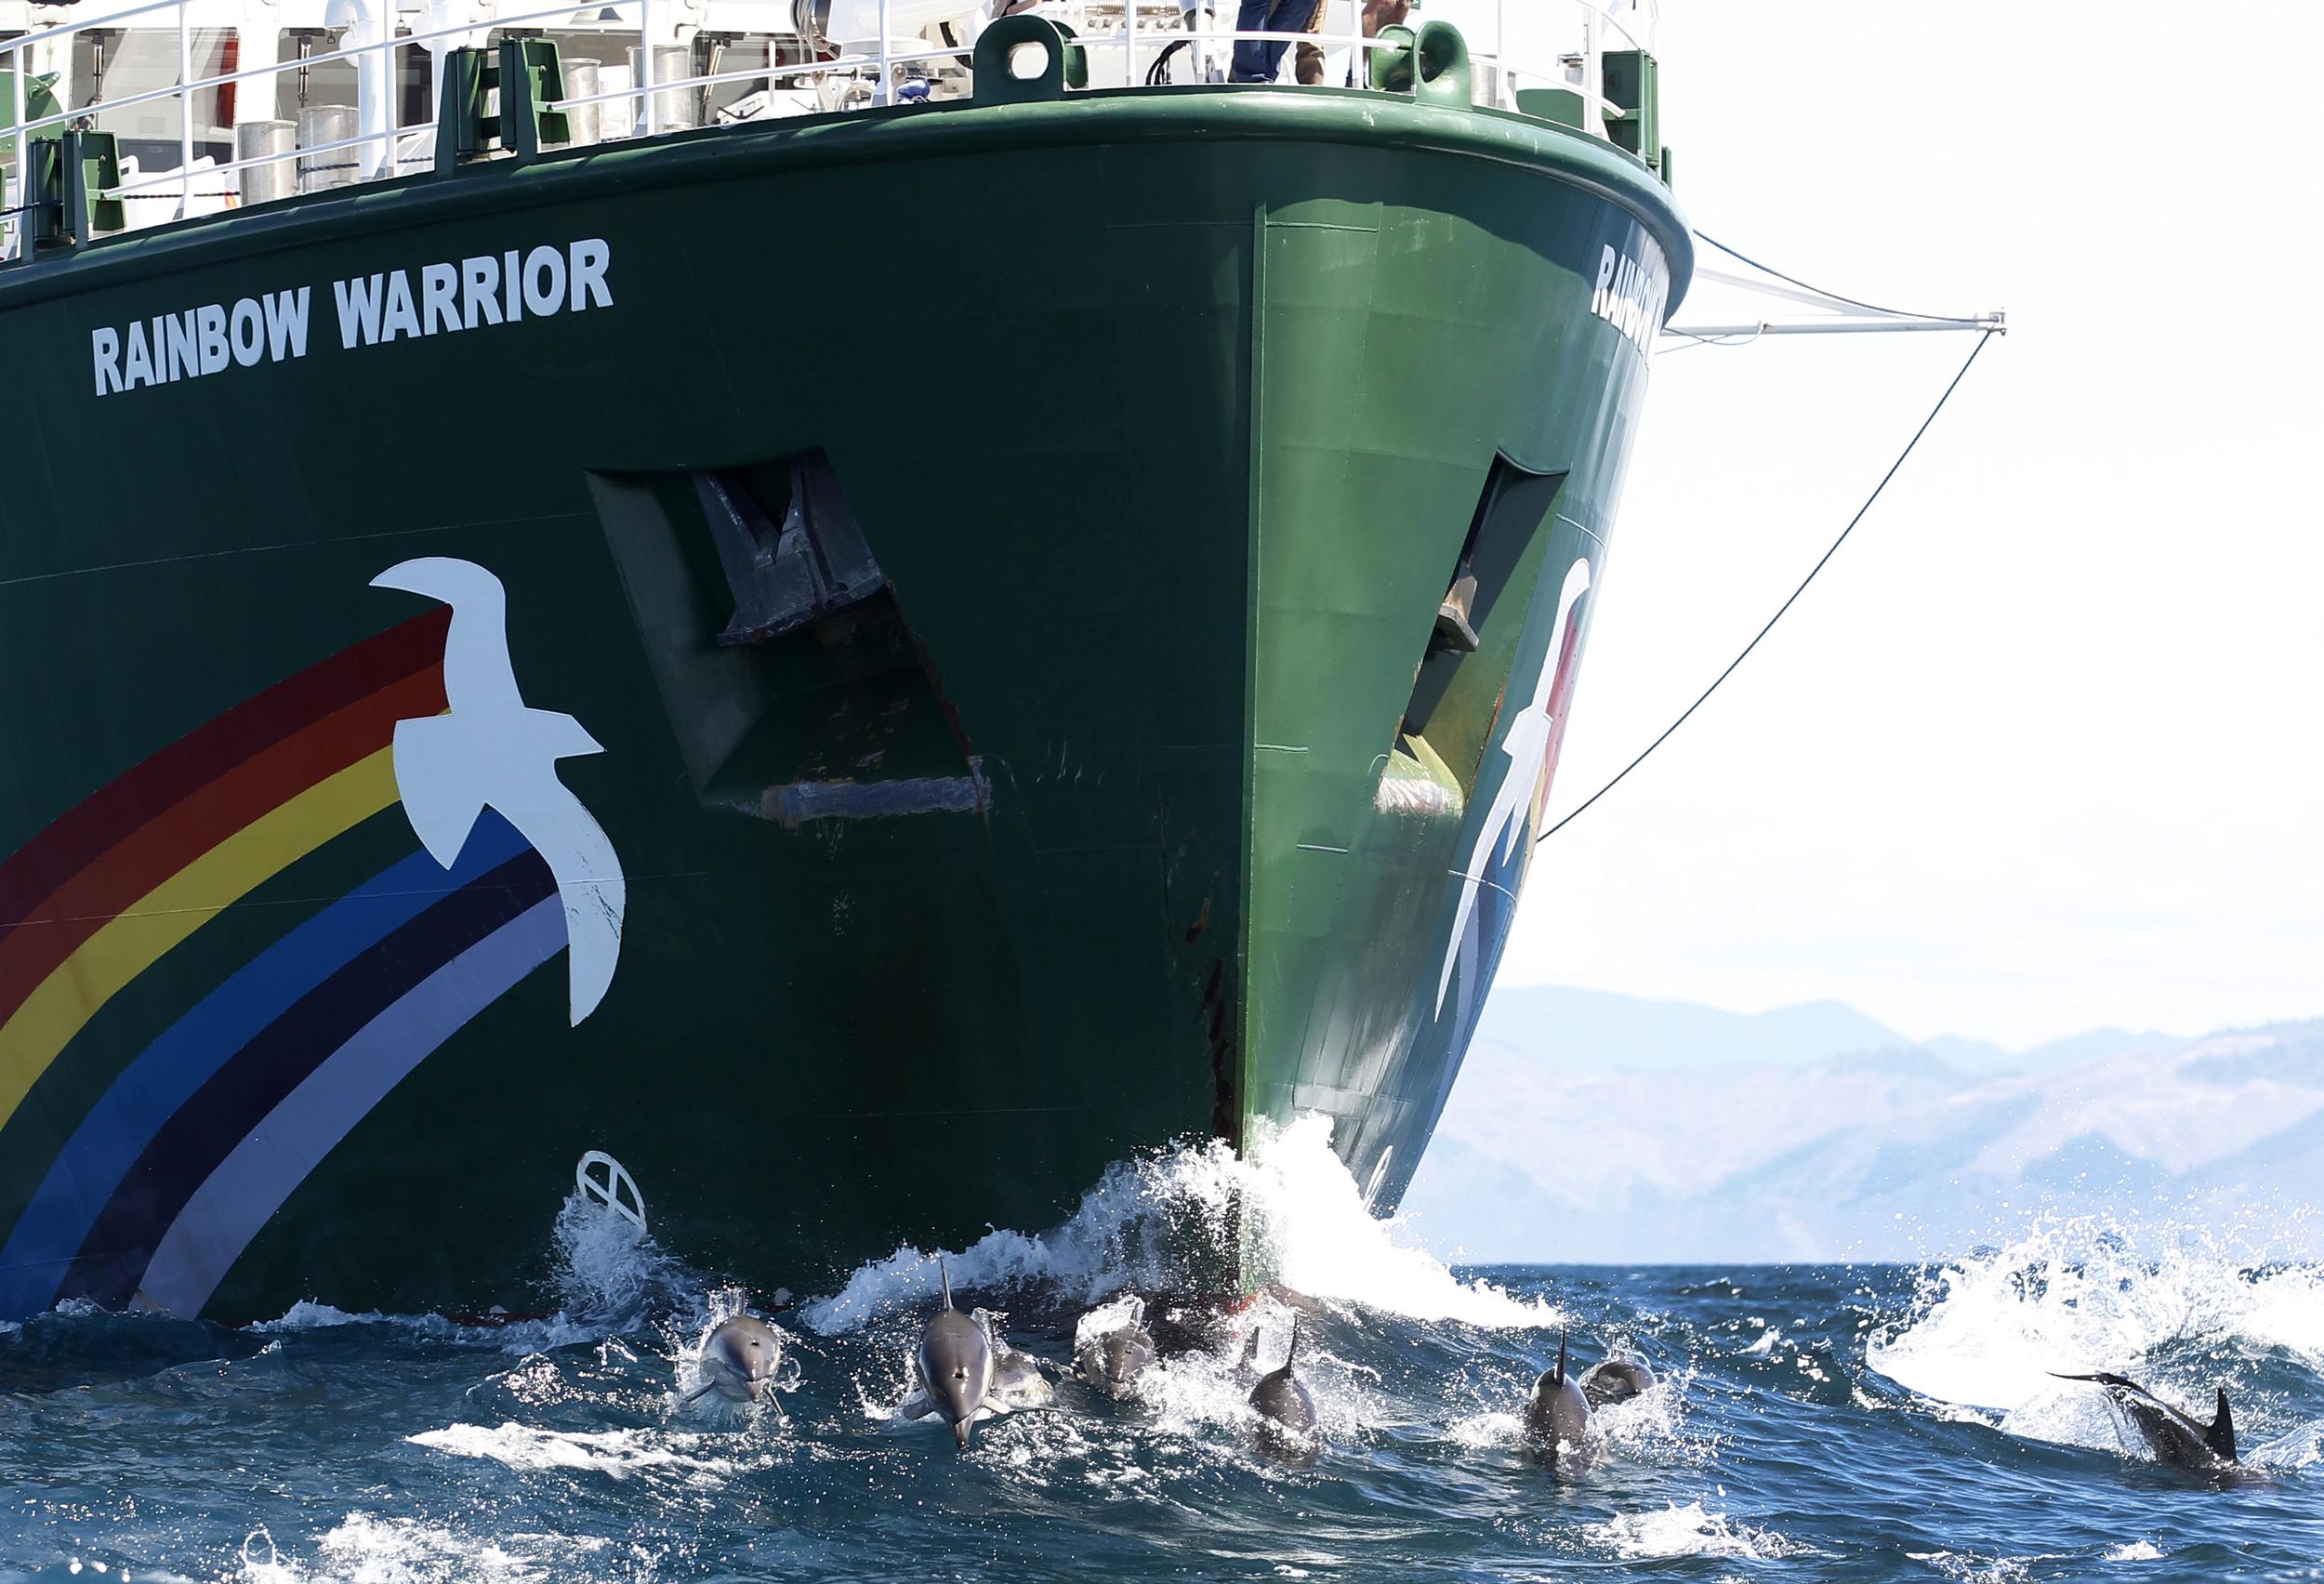 Many dolphins play in the bow wave of the Rainbow Warrior as it cruises through the ocean.